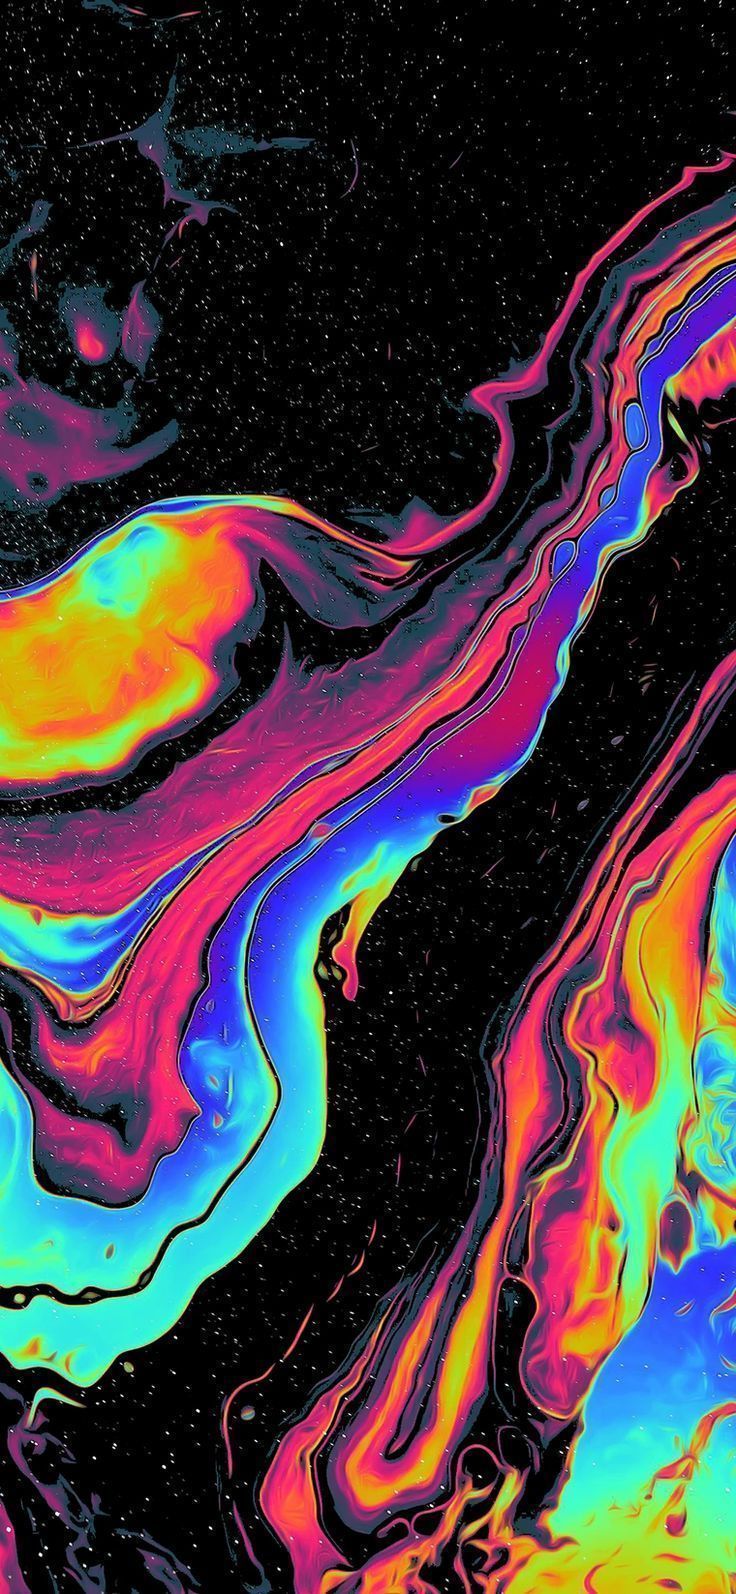 IPhone wallpaper of a black background with colorful abstract art - Psychedelic